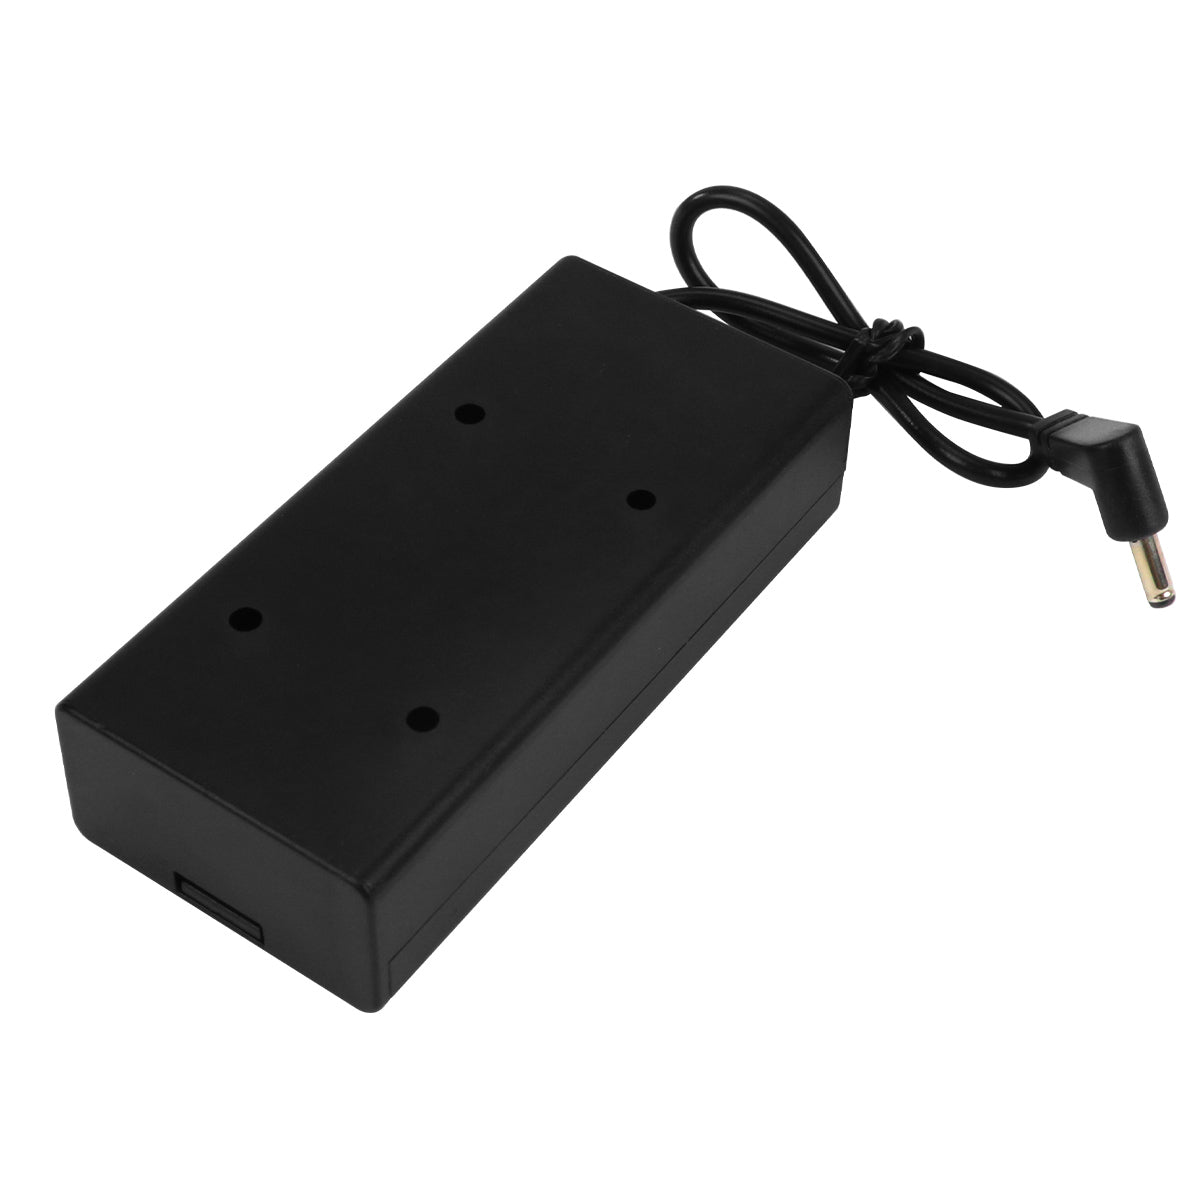 18650 Battery Box Double Bays with Power Switch for Robot Projects